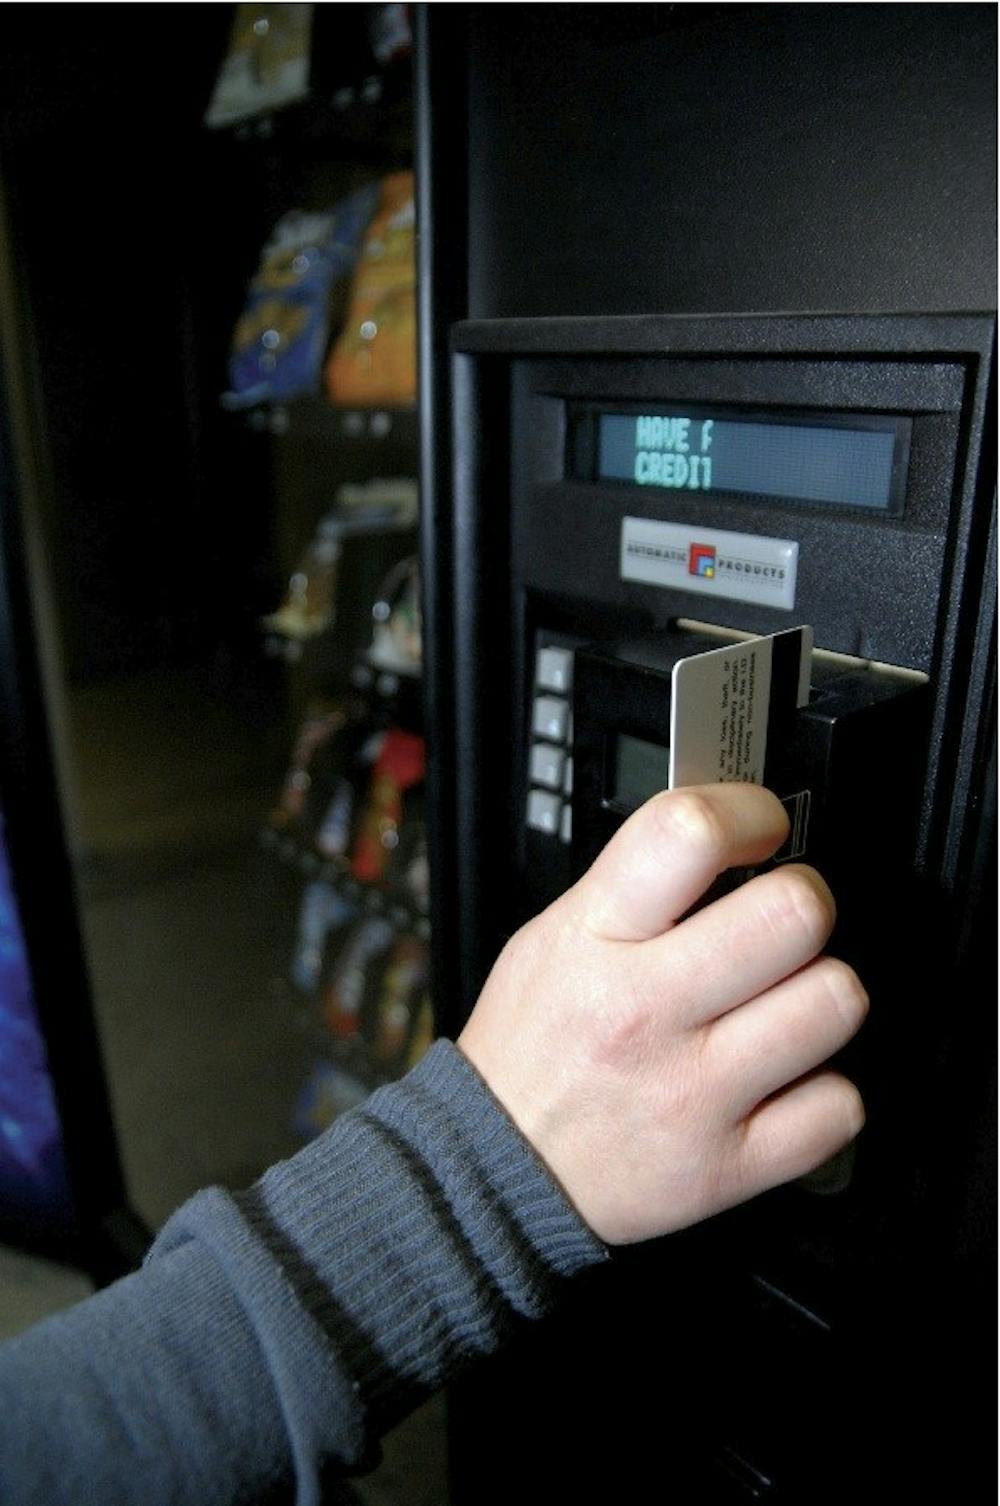 Staff members in Culler Hall were stealing money from vending machines like the one pictured above. The staffers were fired and await trial.